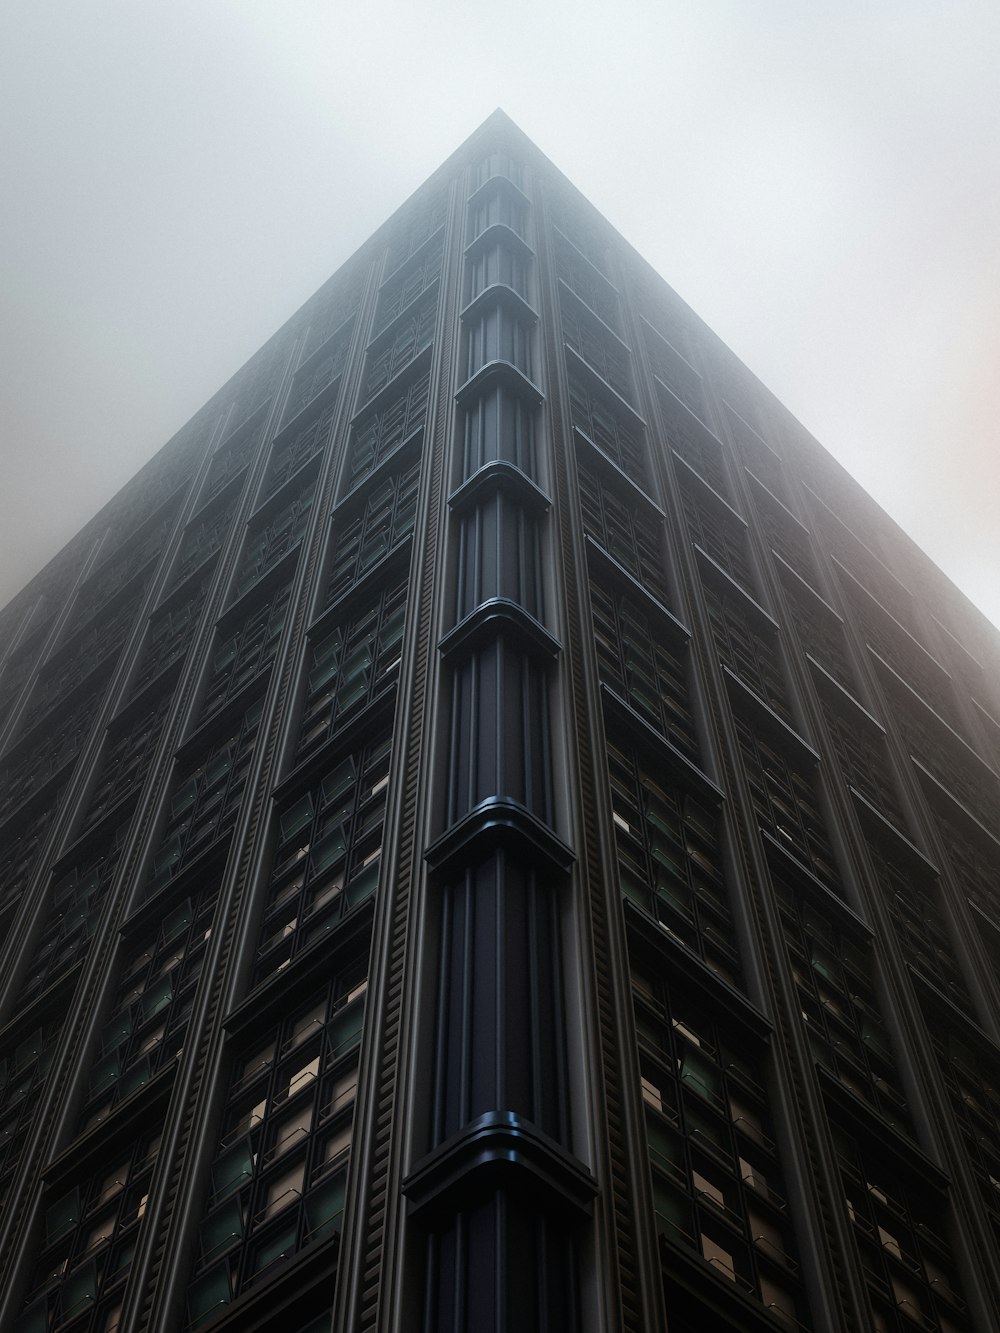 a tall building with a tall tower